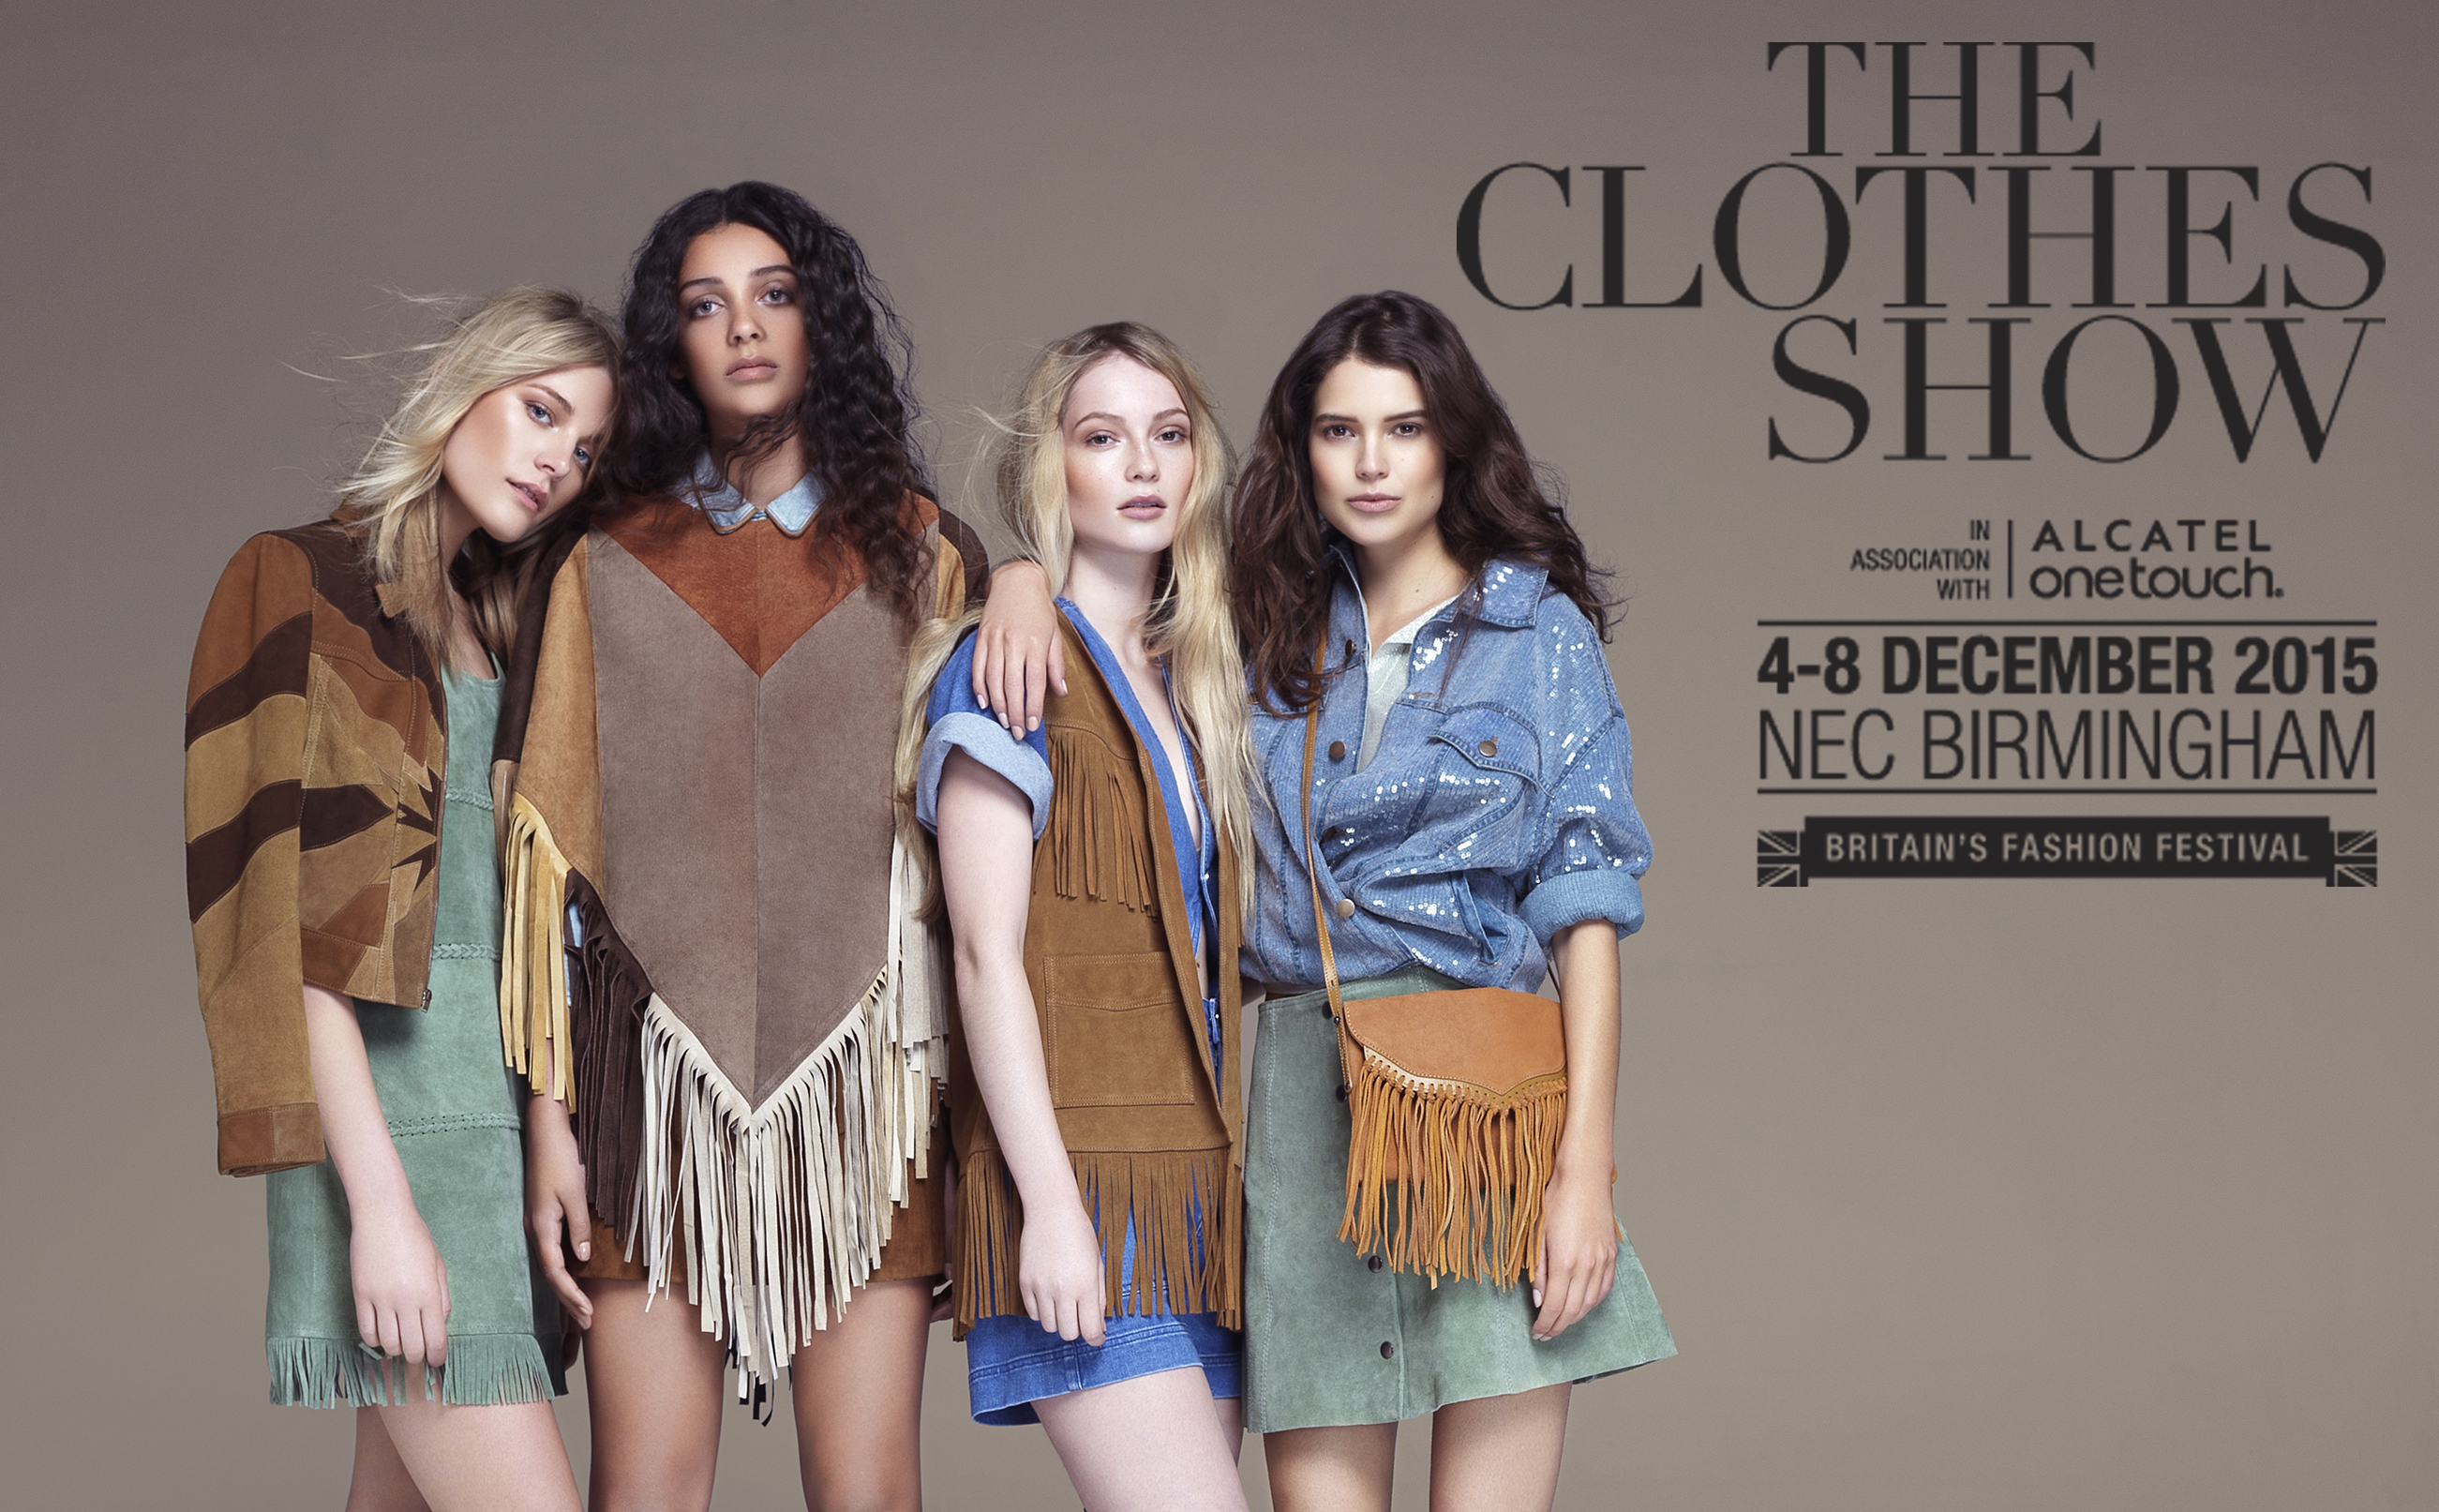 Win Tickets to The Clothes Show - Capital Manchester